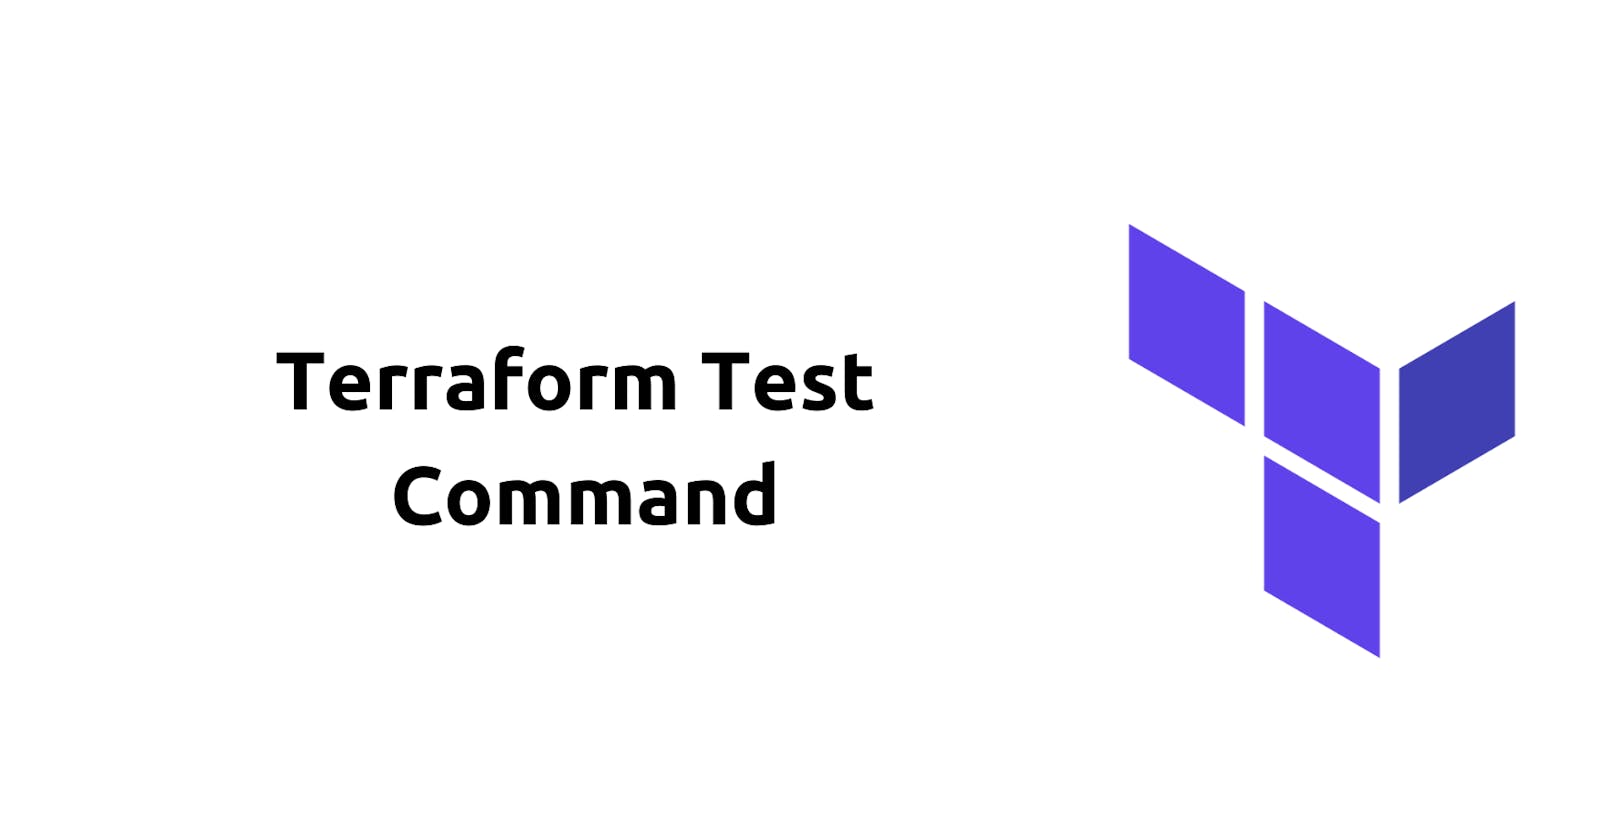 Terraform Test Command: Ensuring Infrastructure as Code Integrity